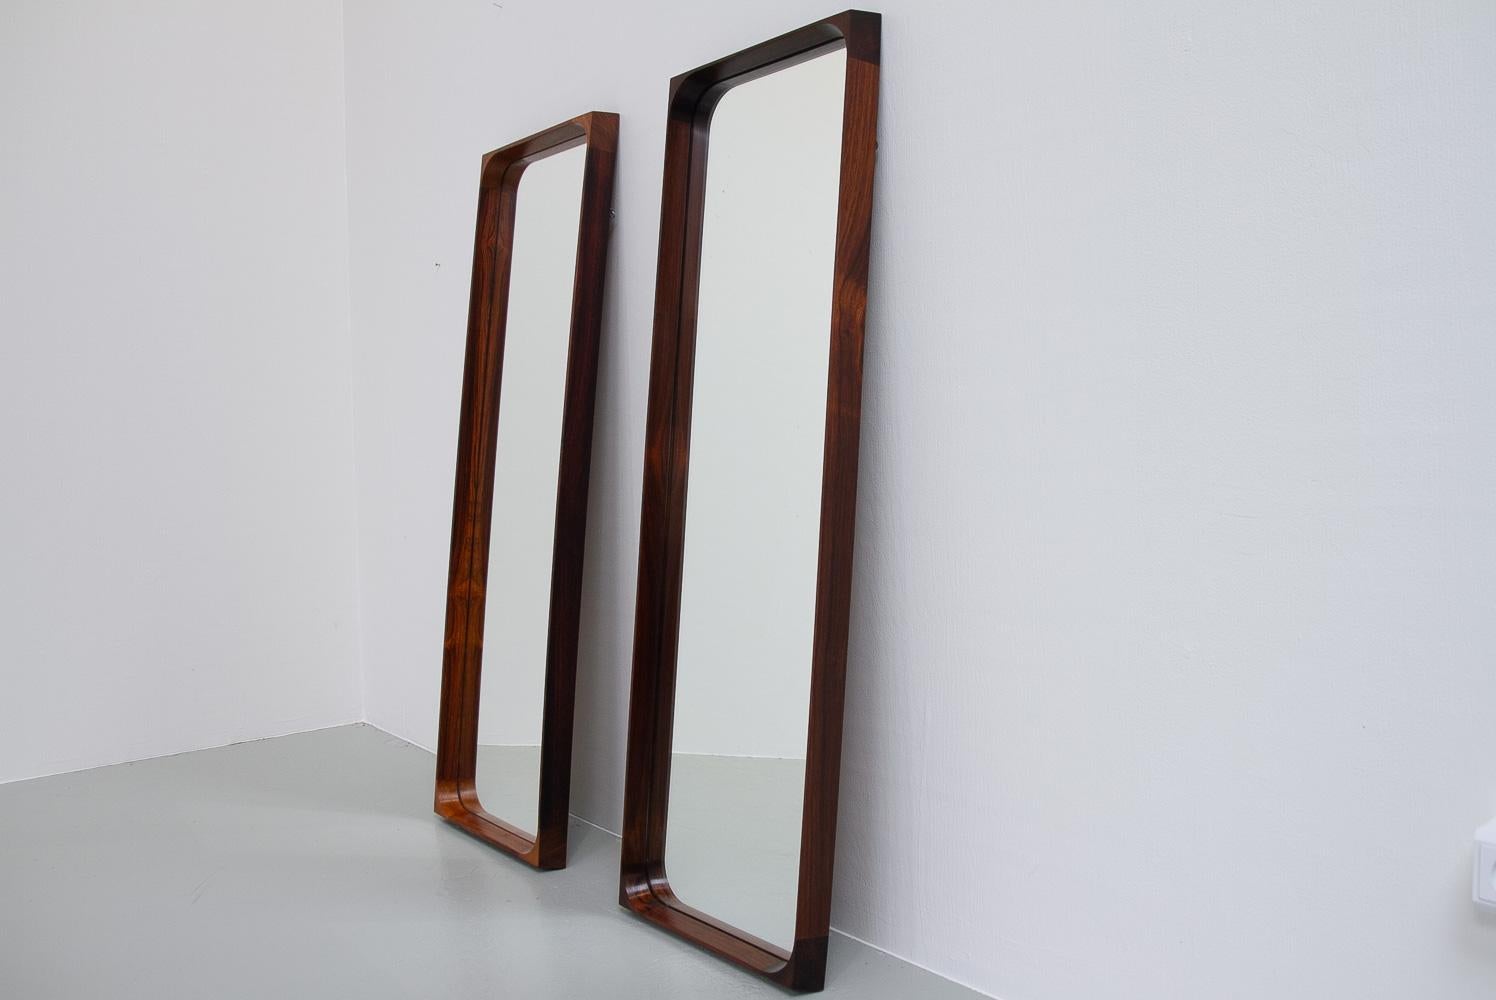 Danish Modern Rosewood Mirrors by Niels Clausen for NC Møbler, 1960s. Set of 2. For Sale 15